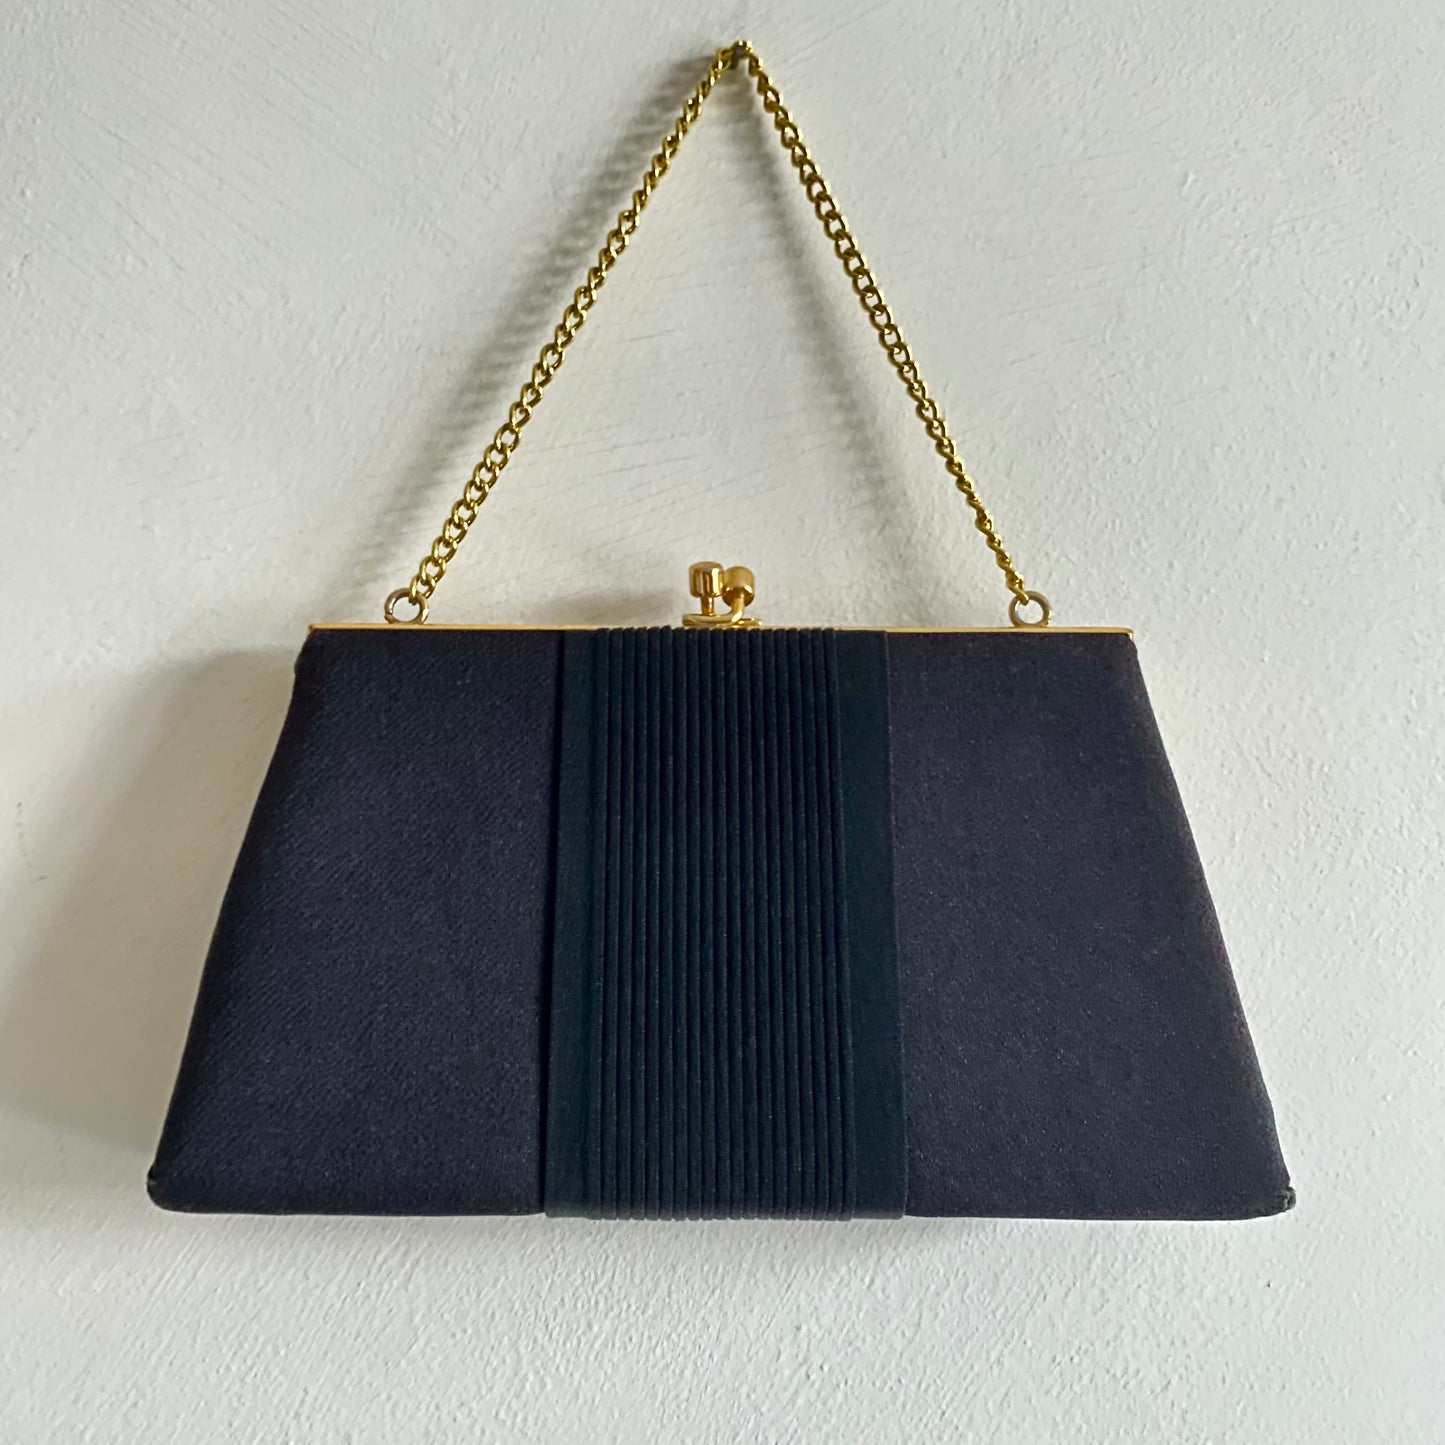 Black grosgrain vintage evening bag Gold clasp closure Gold chain handle (12") Fabric lined Measures 9" wide x 5" high x 2"